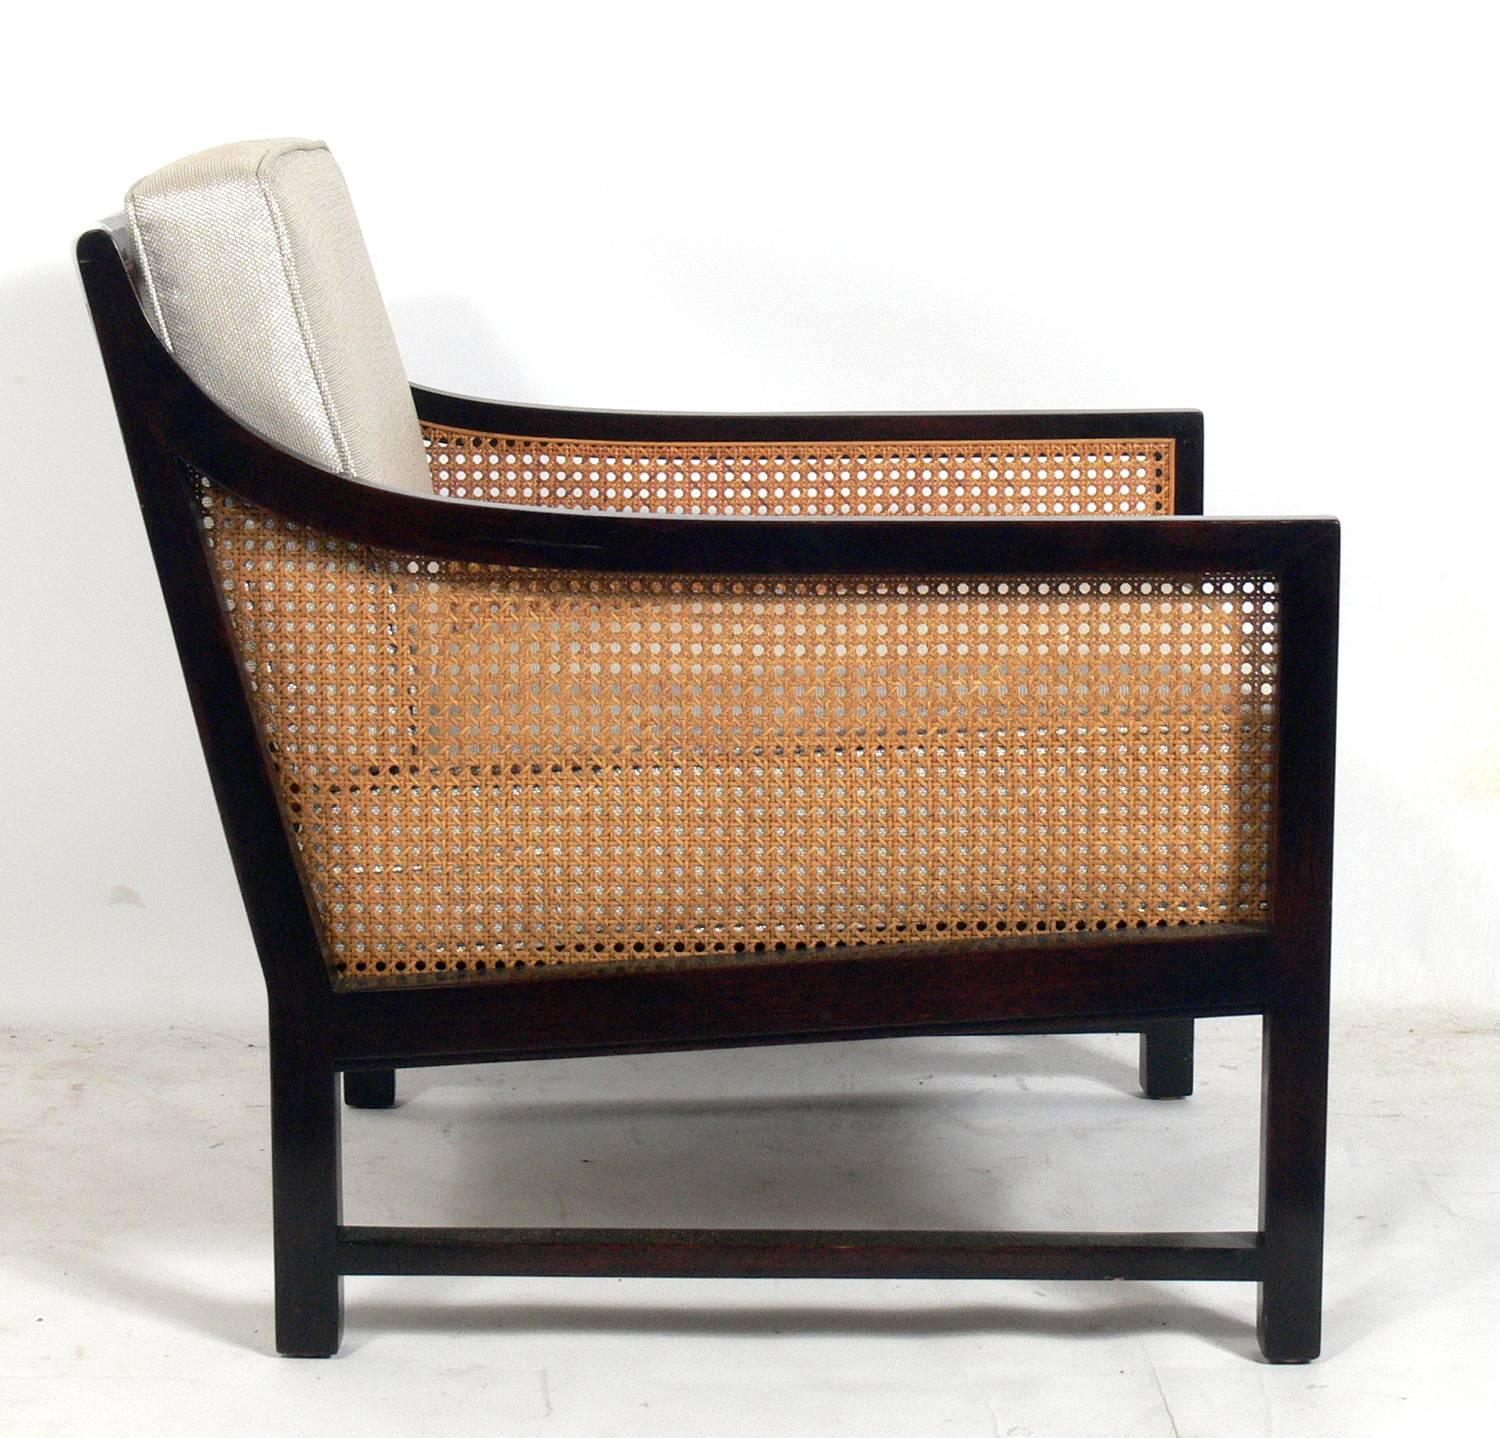 Pair of clean lined caned lounge chairs, American, circa 1980s. They have been reupholstered in an ivory and tan color fabric.